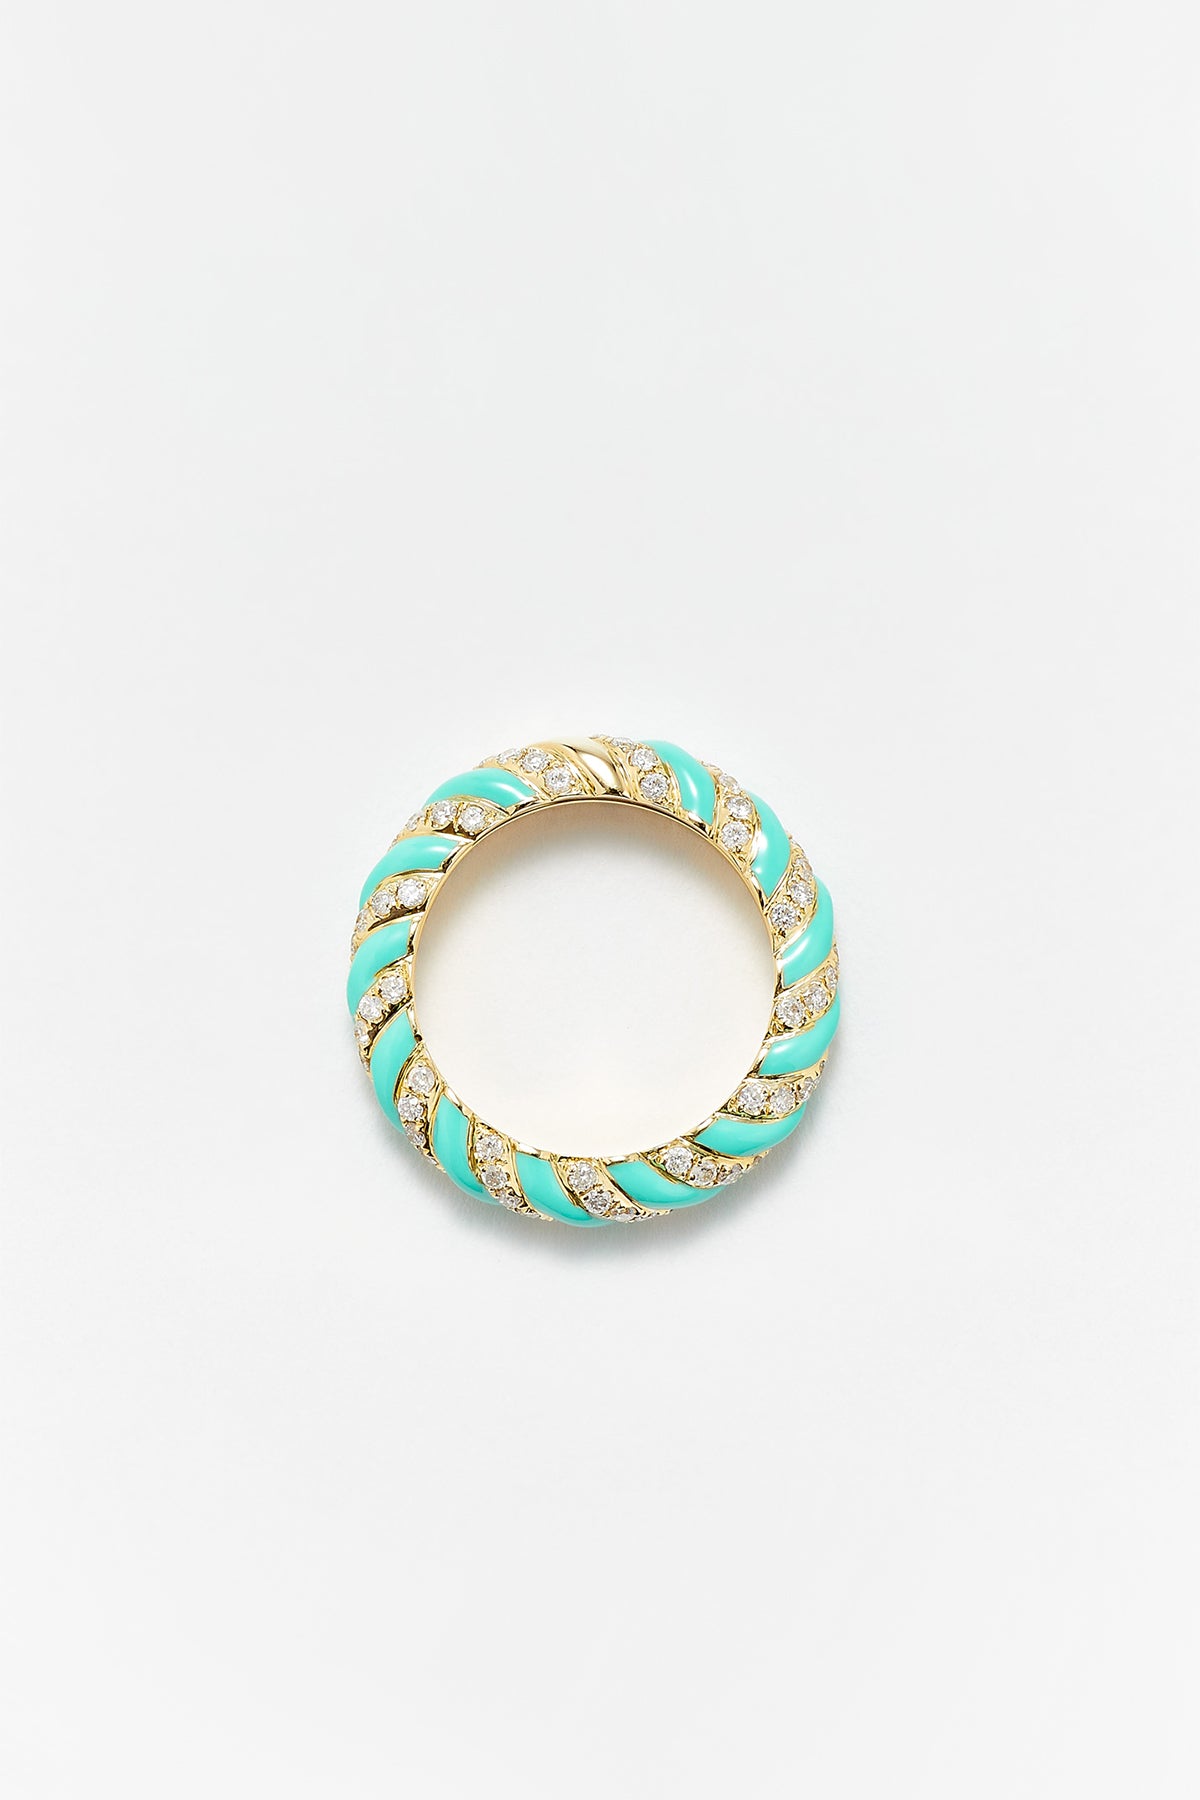 YVONNE LÉON | TWISTED TURQUOISE RING